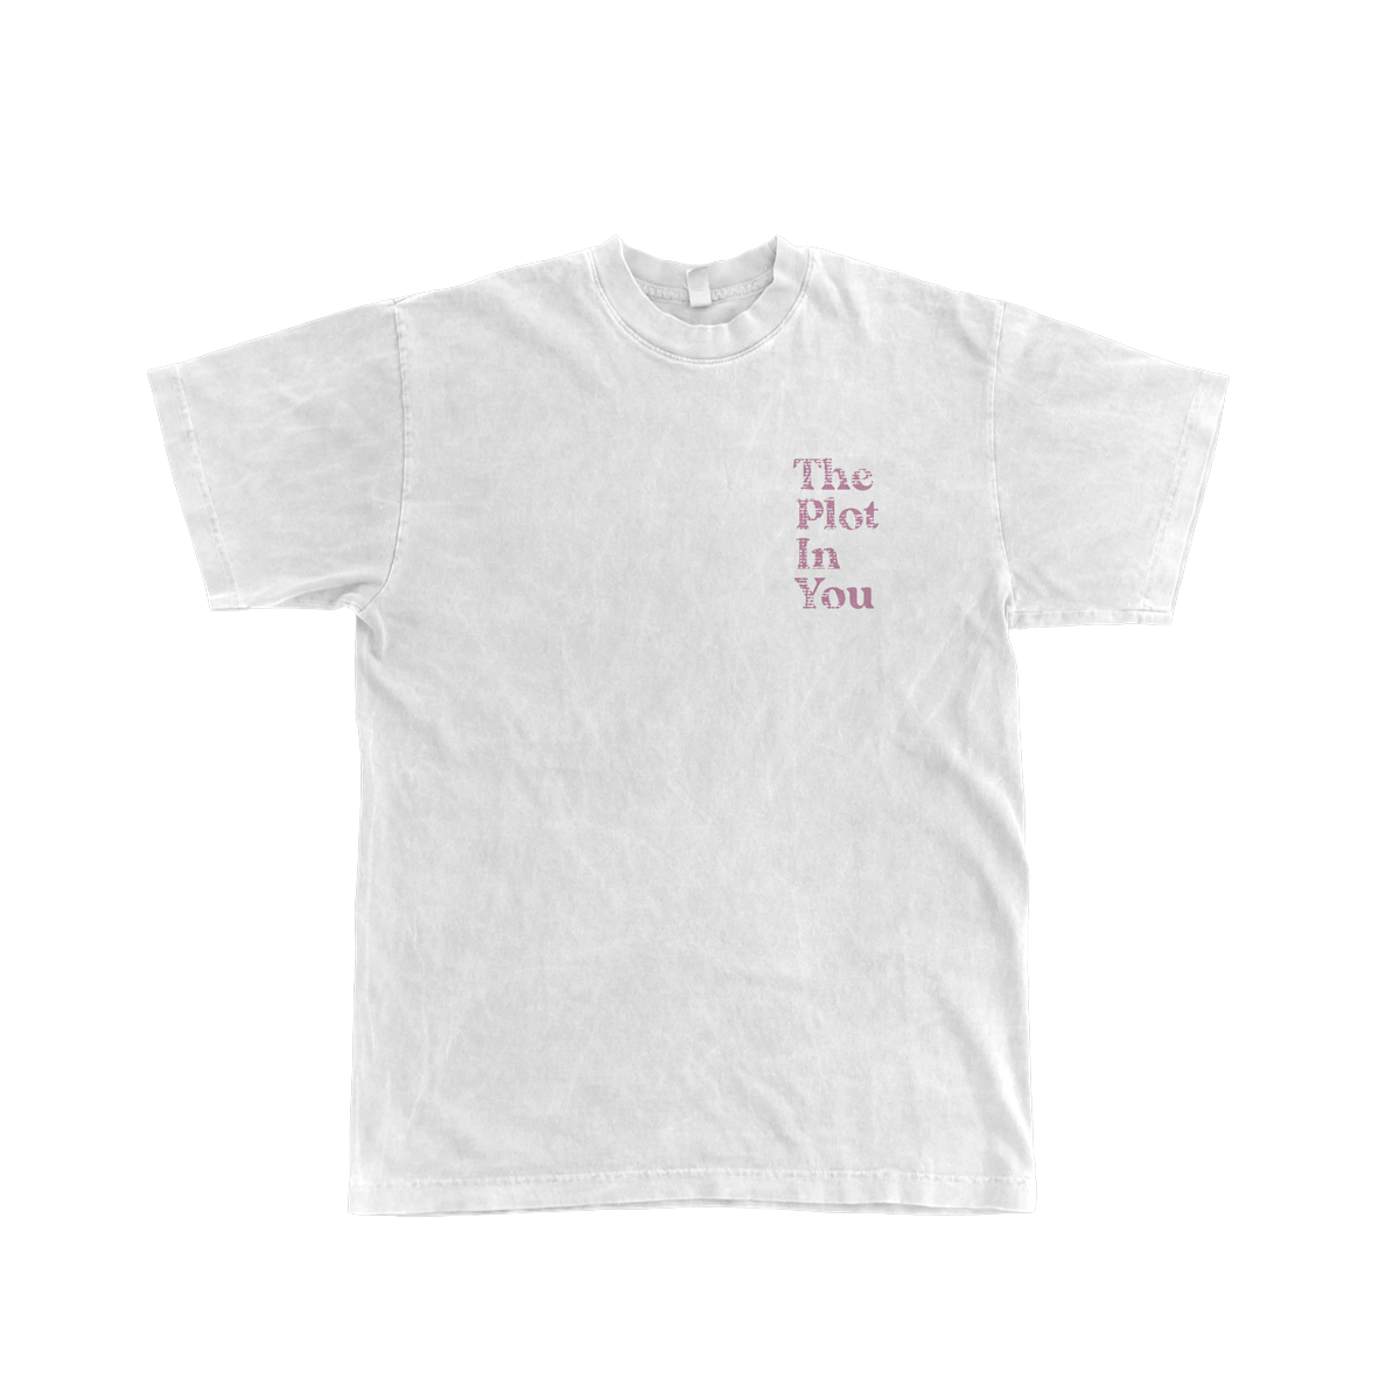 The Plot In You "Outline" White T-Shirt